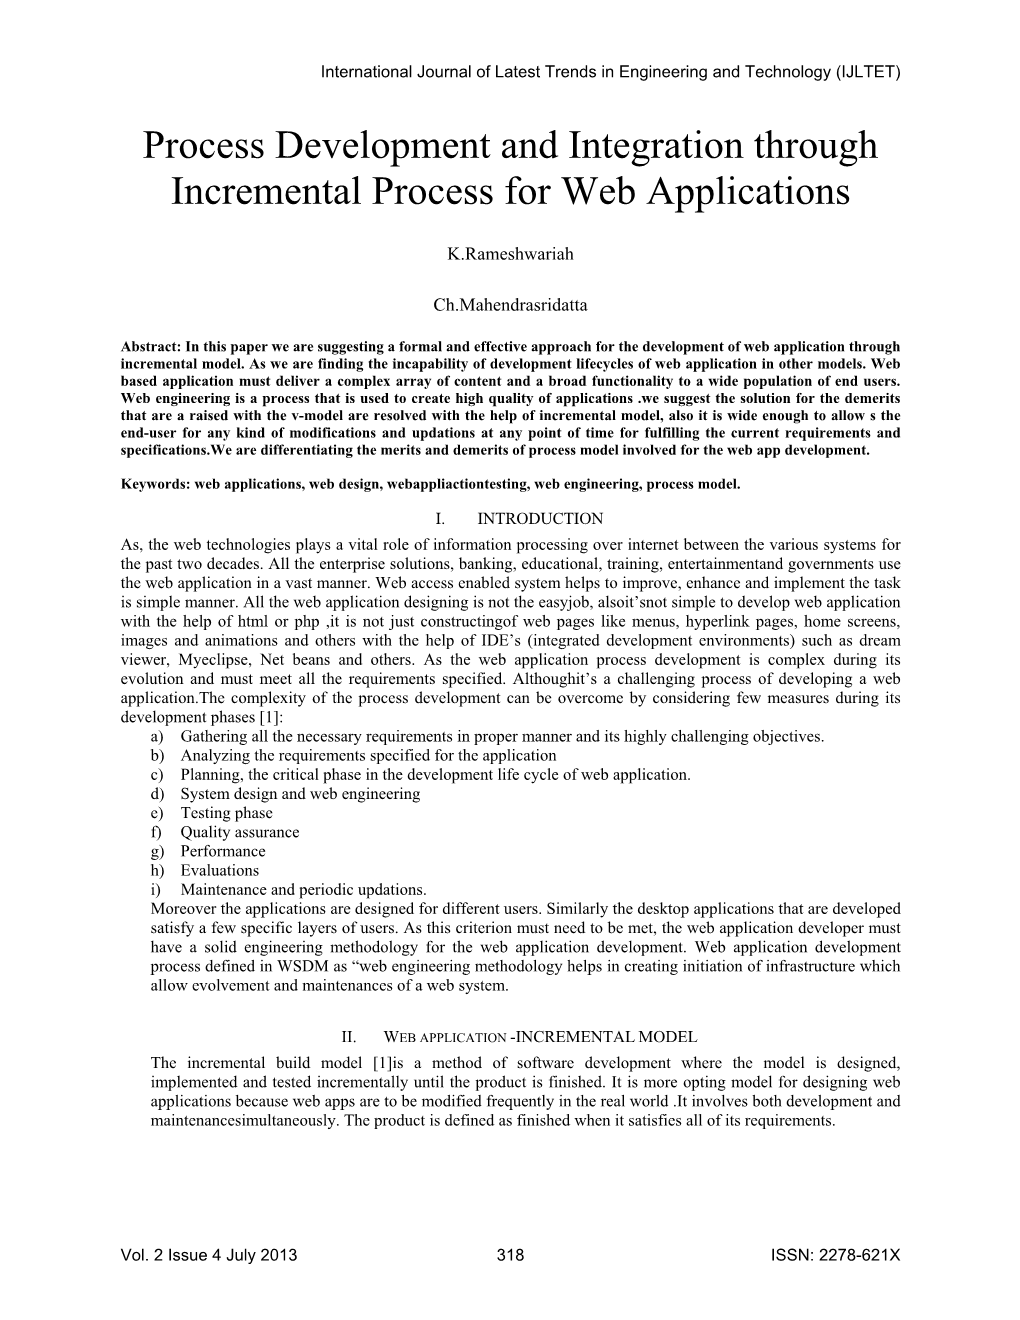 Process Development and Integration Through Incremental Process for Web Applications